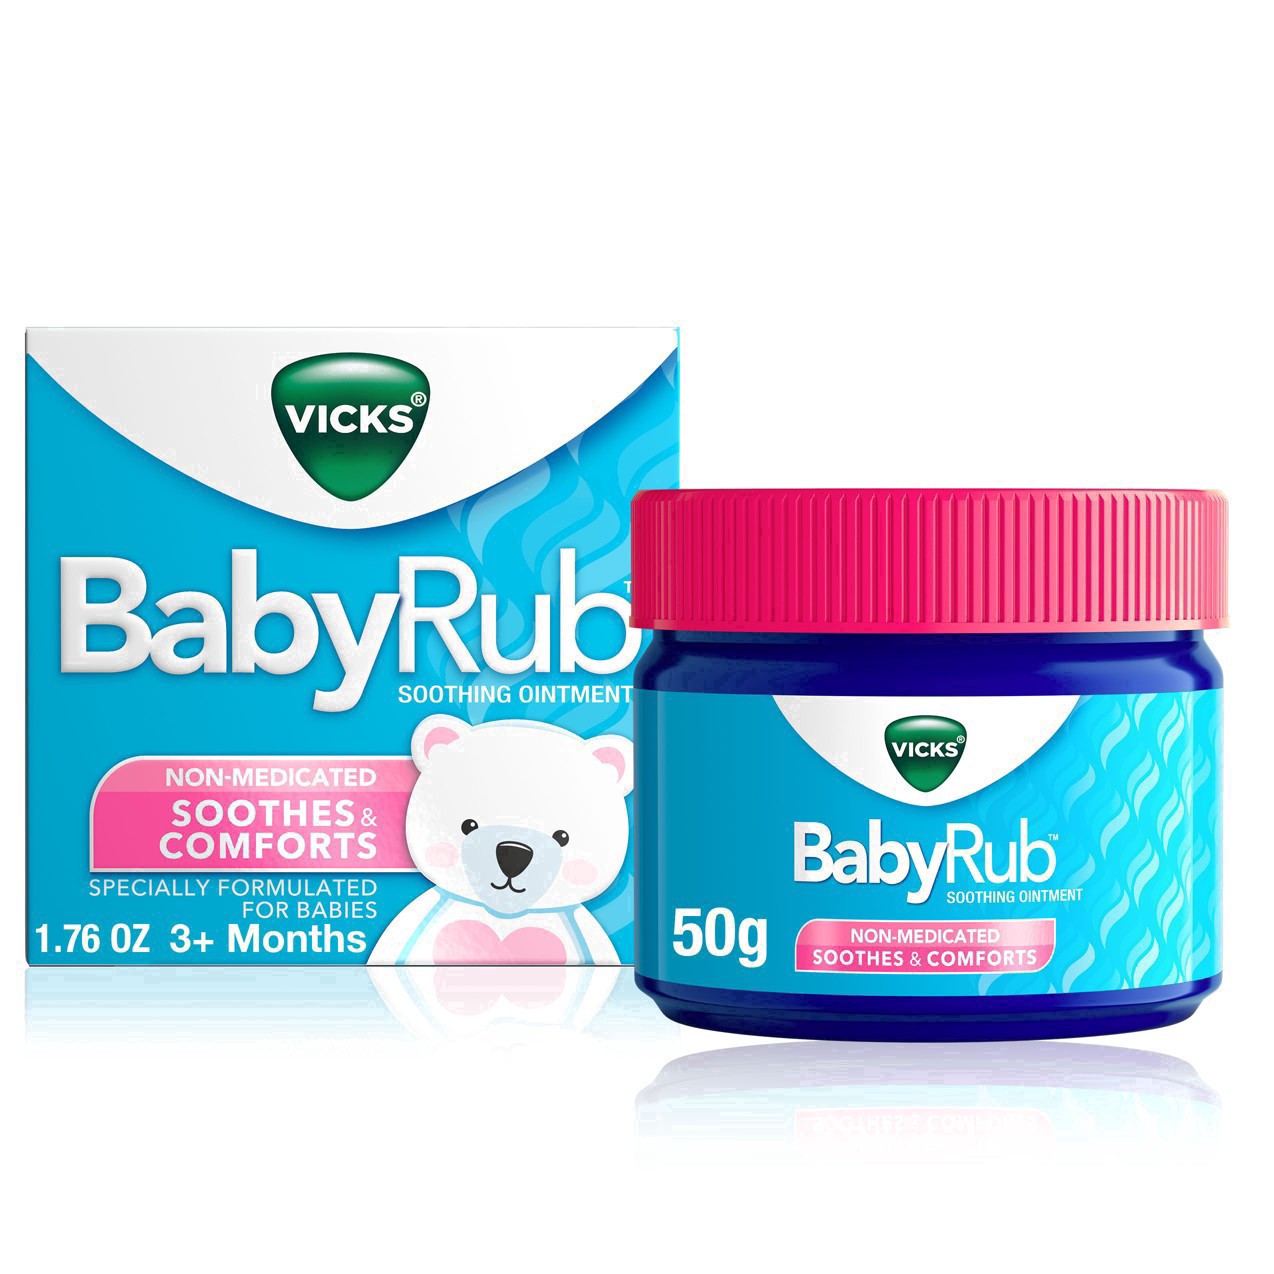 slide 77 of 78, Vicks BabyRub, Chest Rub Ointment with Soothing Aloe, Eucalyptus, Lavender, and Rosemary, from The Makers of VapoRub, 1.76 oz, 1.76 oz